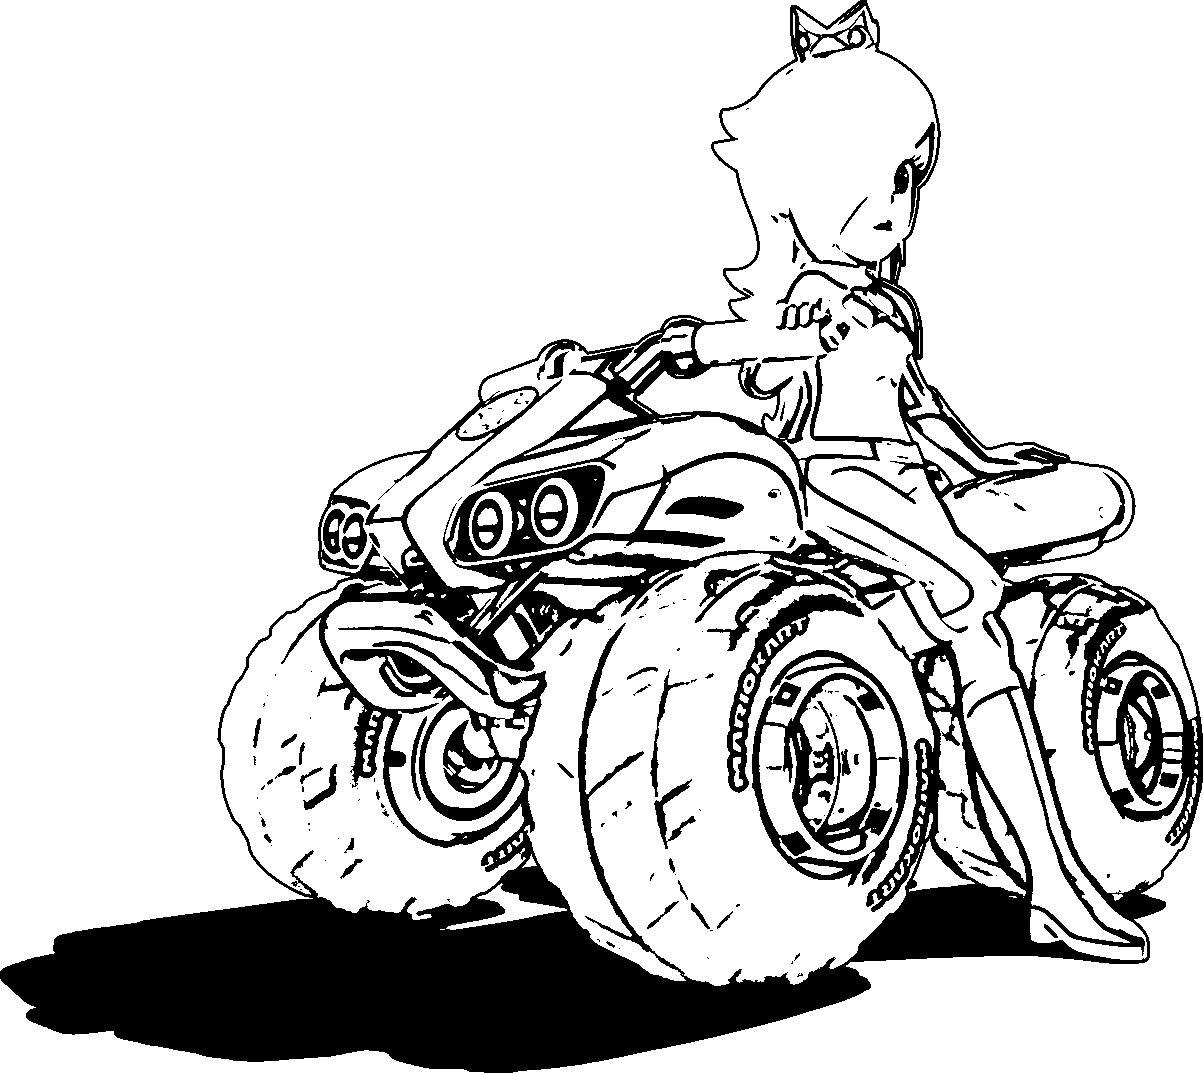 Mario Kart 8 Coloring Pages Coloring Home